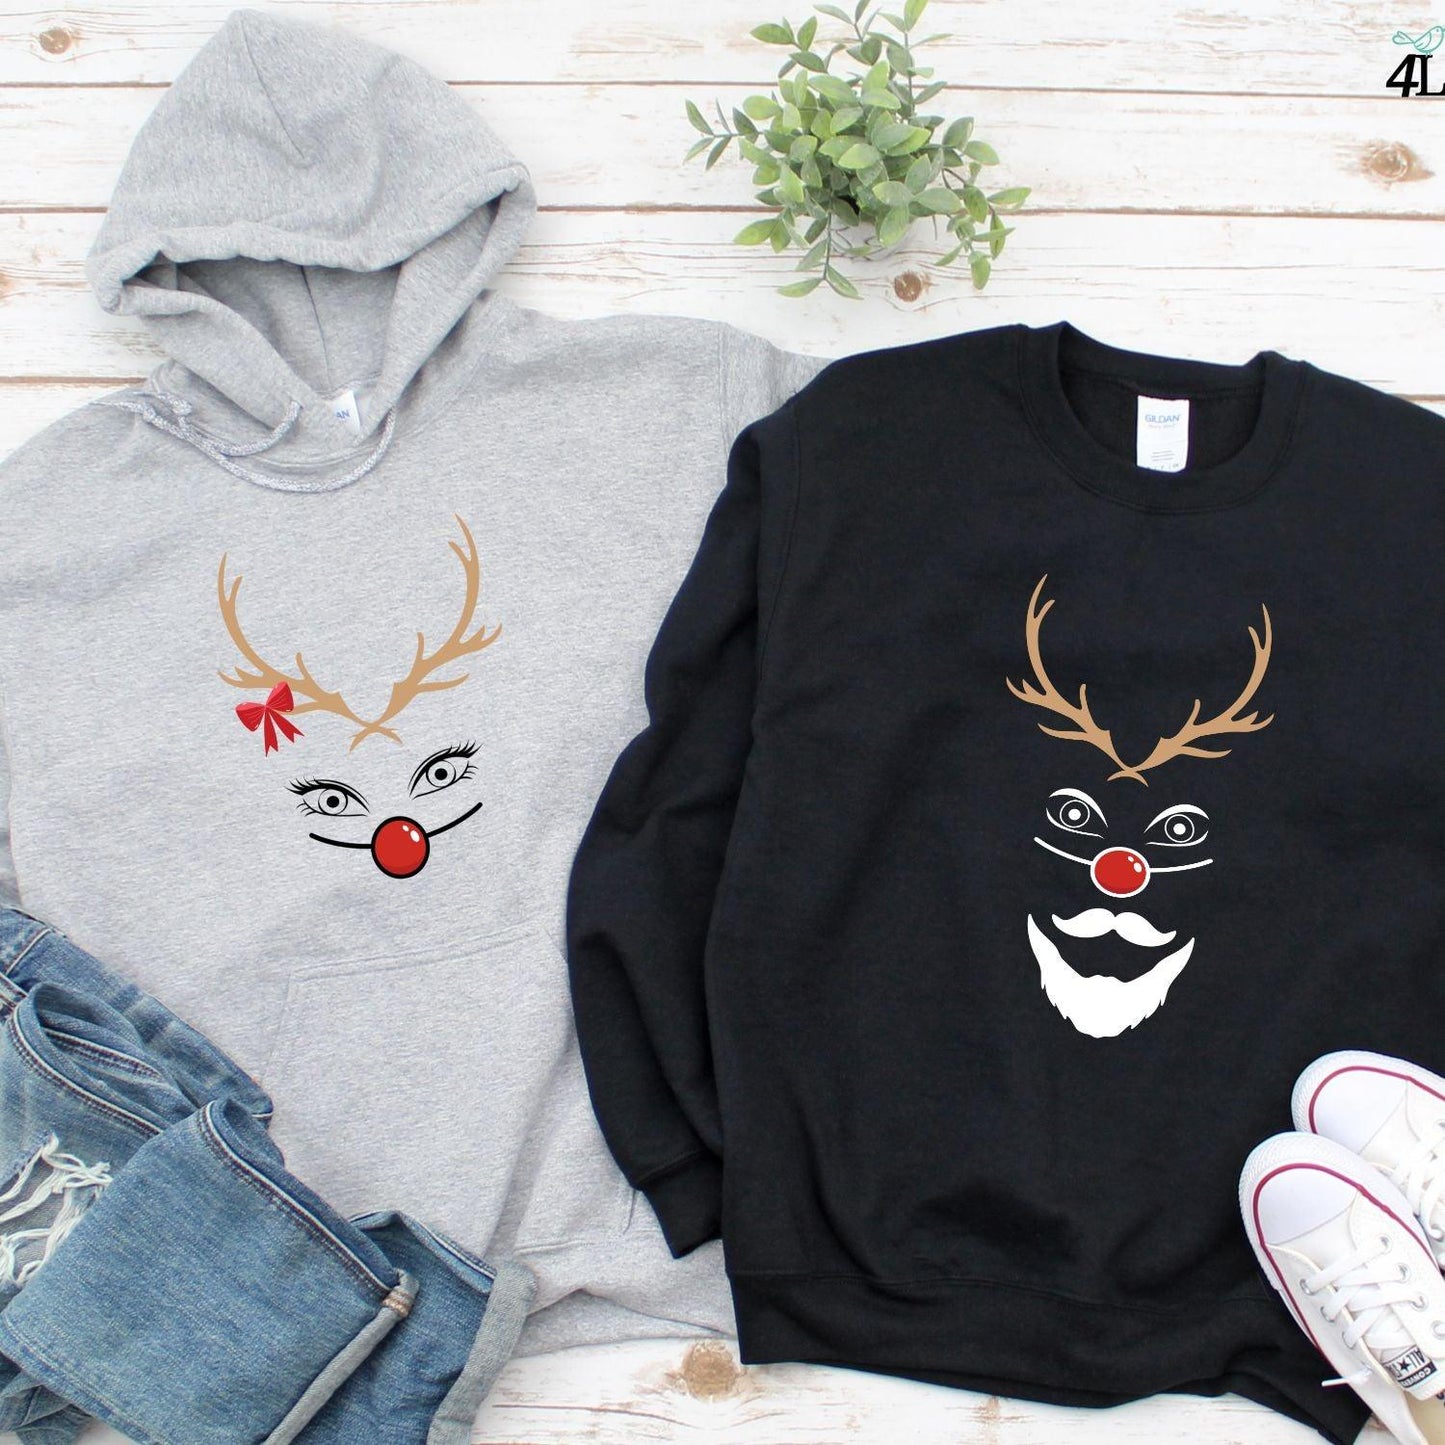 Funny Christmas Matching Set: Reindeer Couple Shirts & Very Merry Ugly Xmas Sweaters - 4Lovebirds